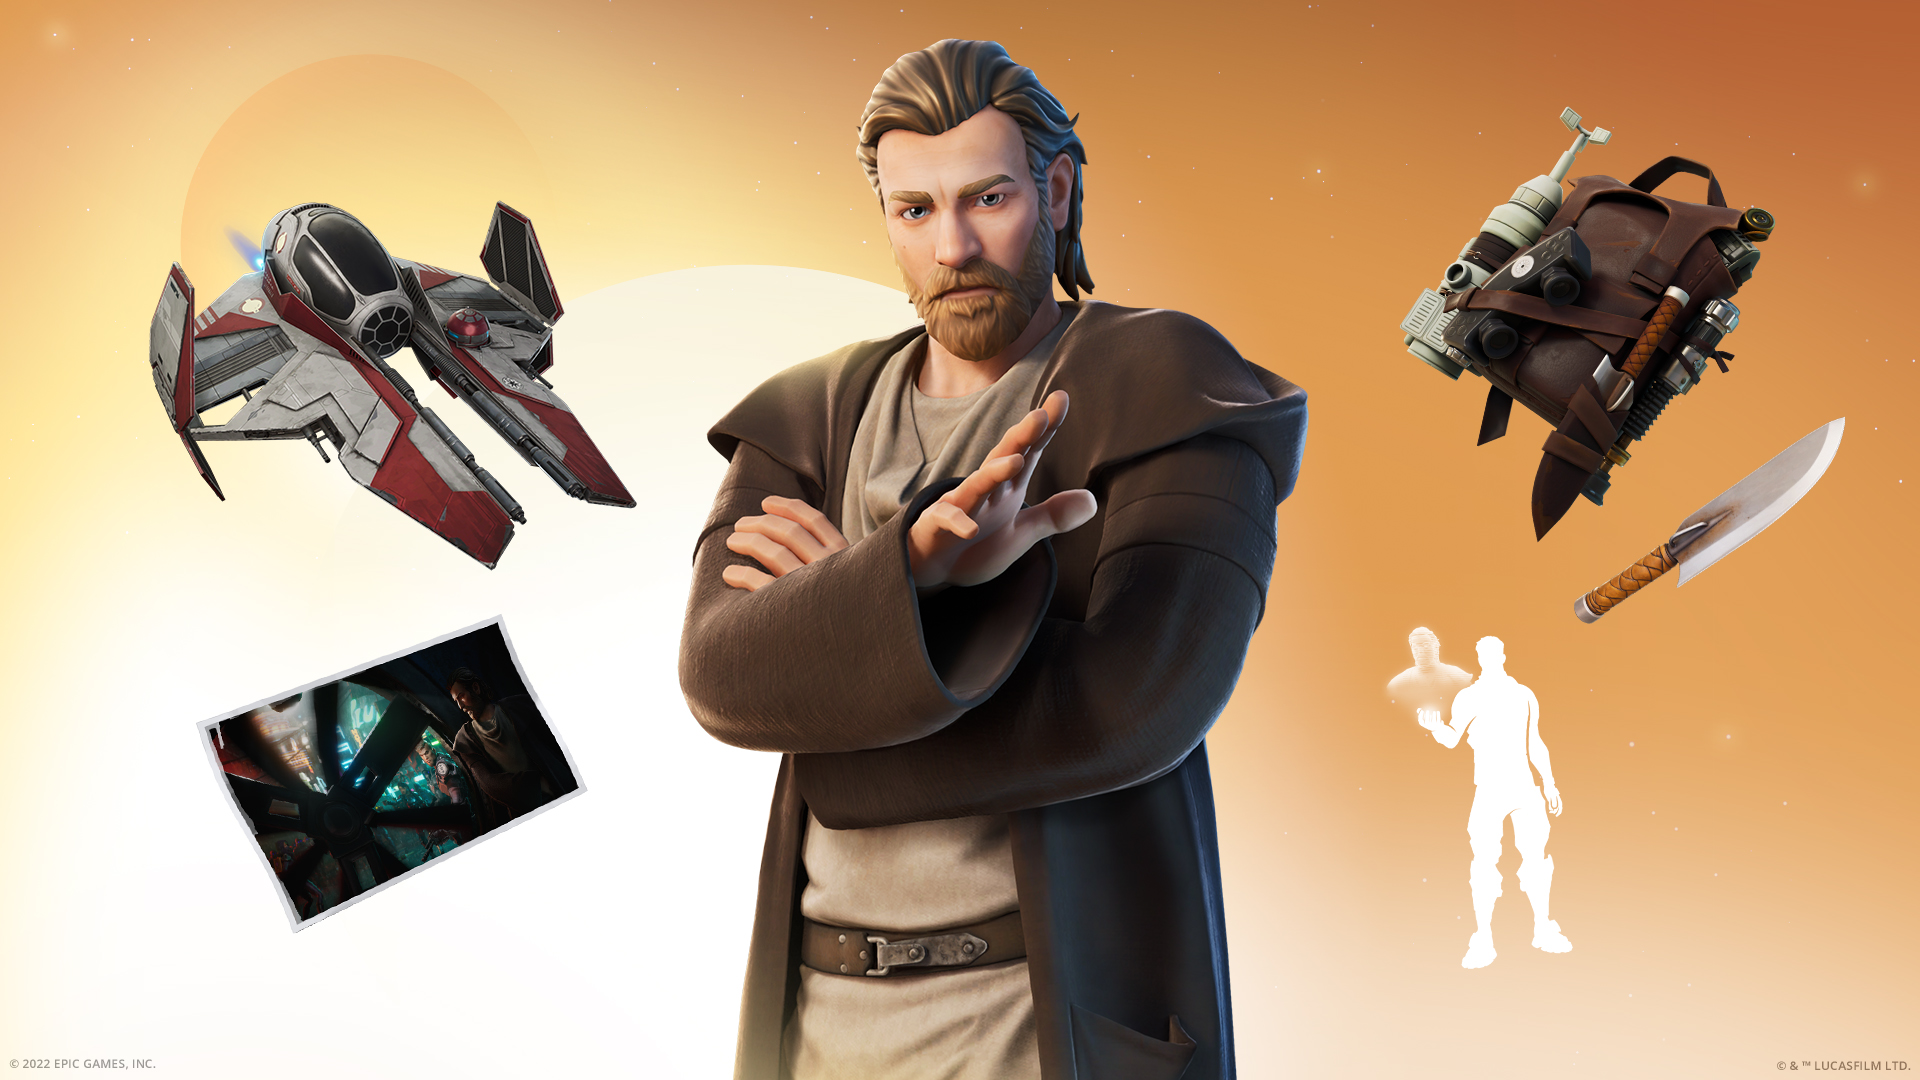 fortnite art showing the items available in the Obi-Wan Kenobi crossover bundle